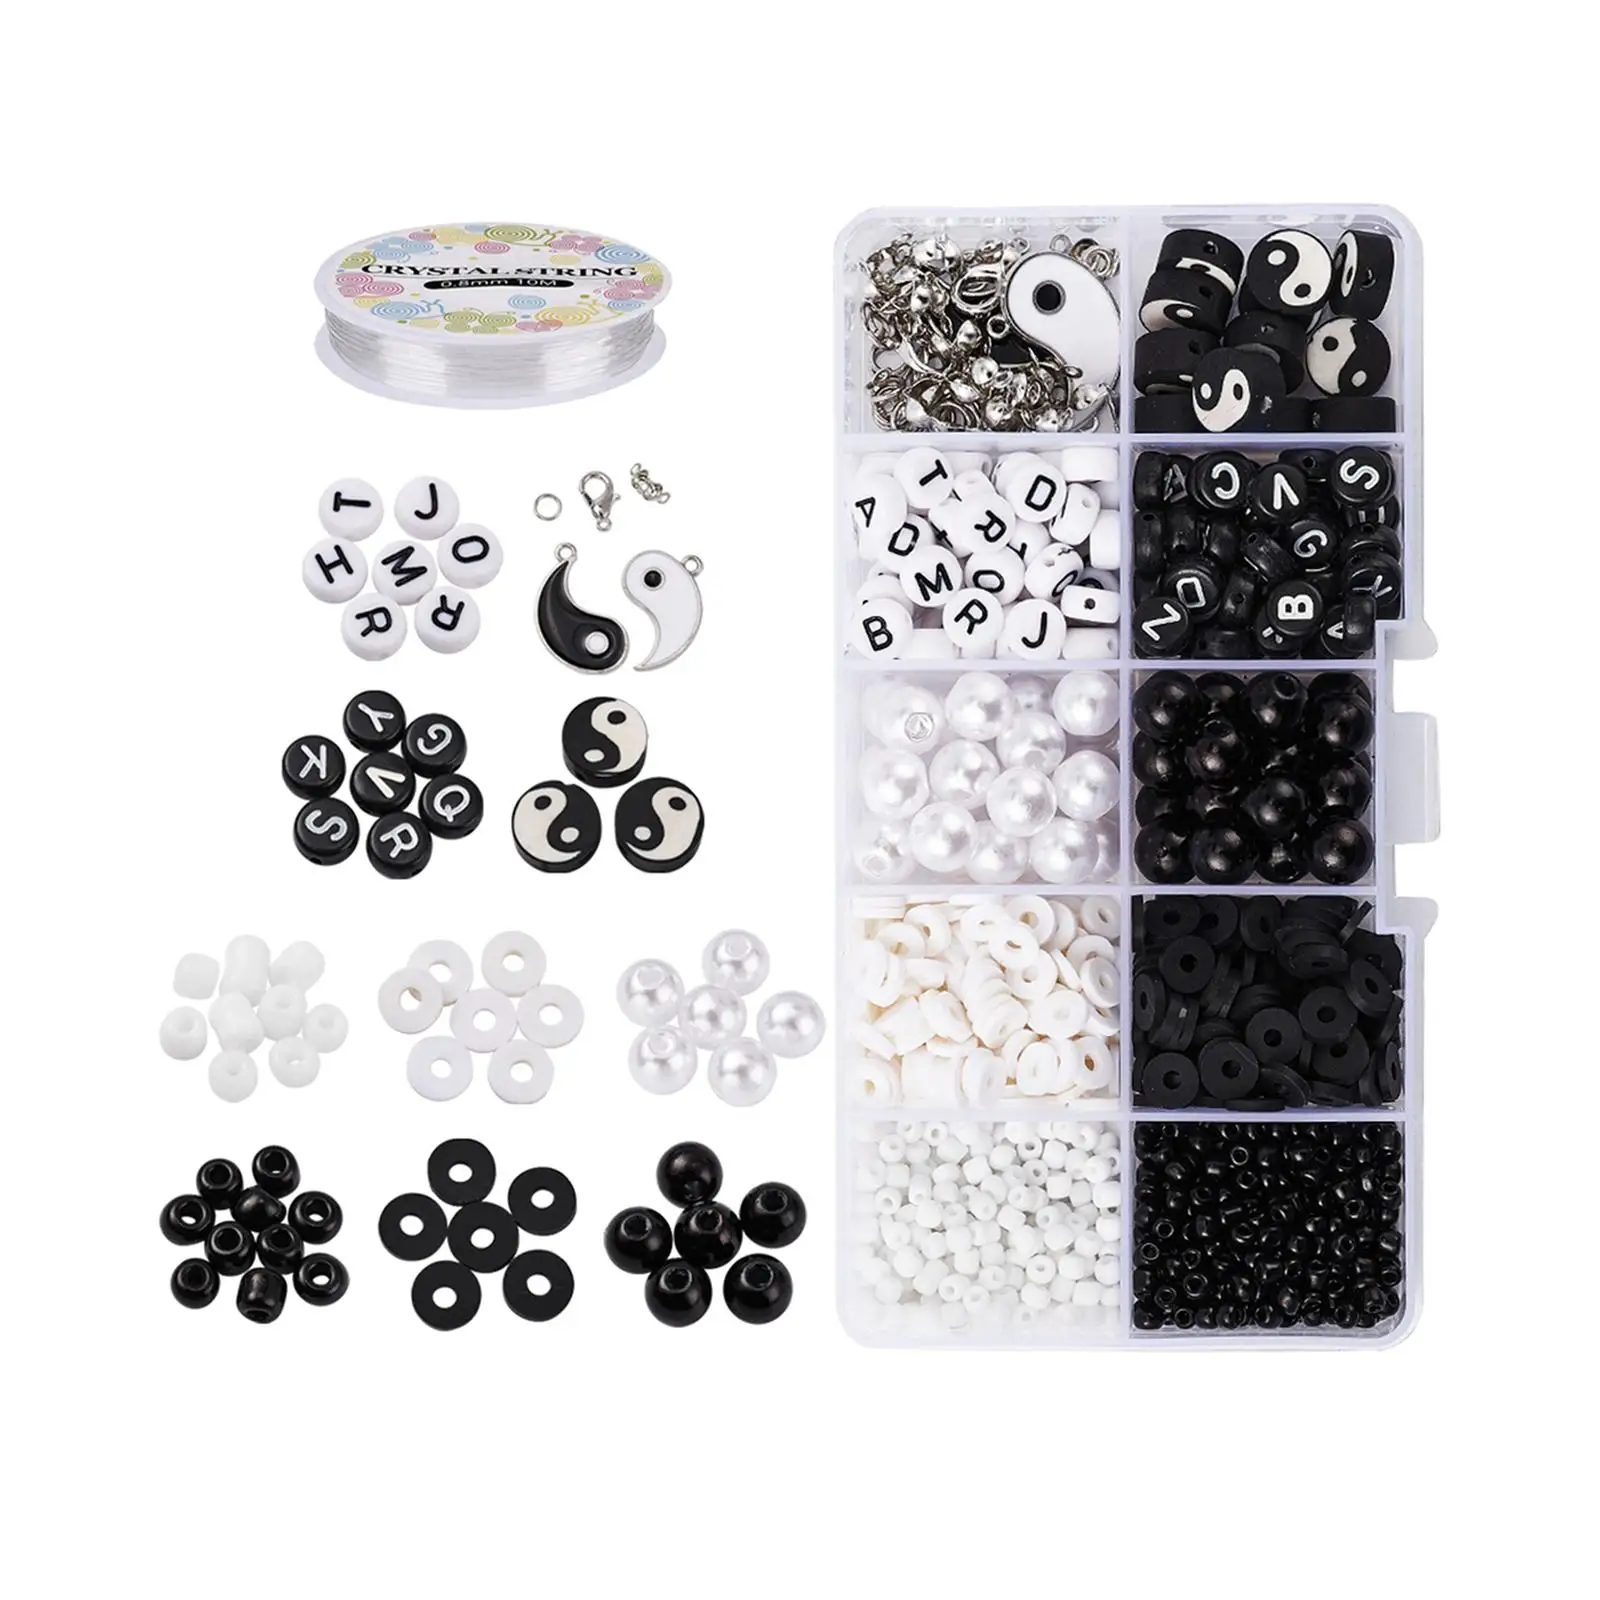 Yin Yang Polymer Clay Bead Set Jewelry Making Handmade Black White Charms for Bracelet Chains Rings Loose Beads with Strings